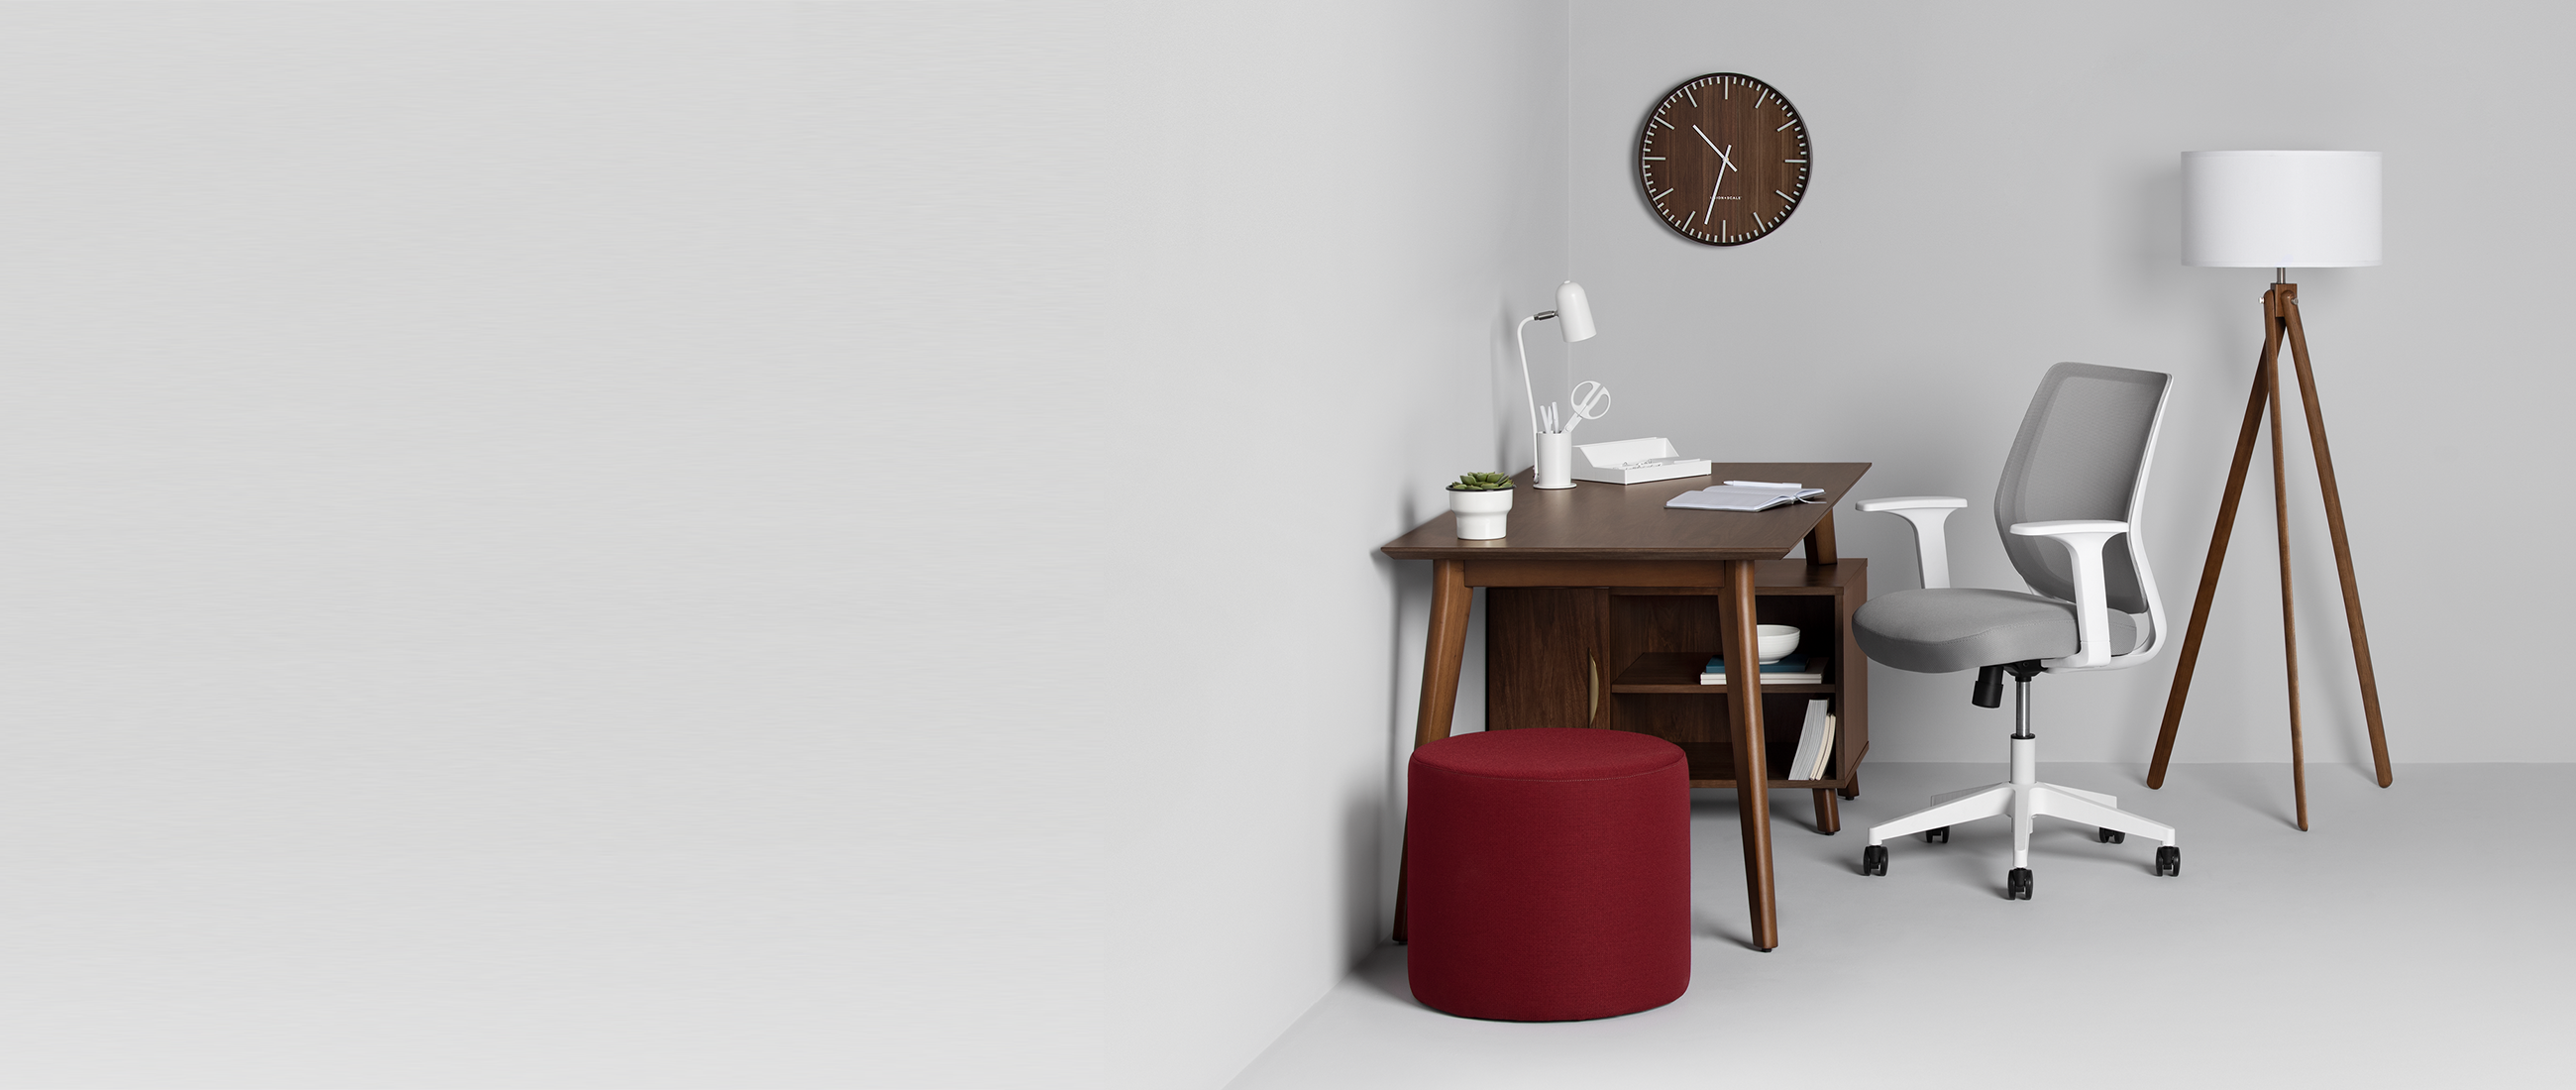 Office set up with desk, chair, pouf, lamp, and clock.